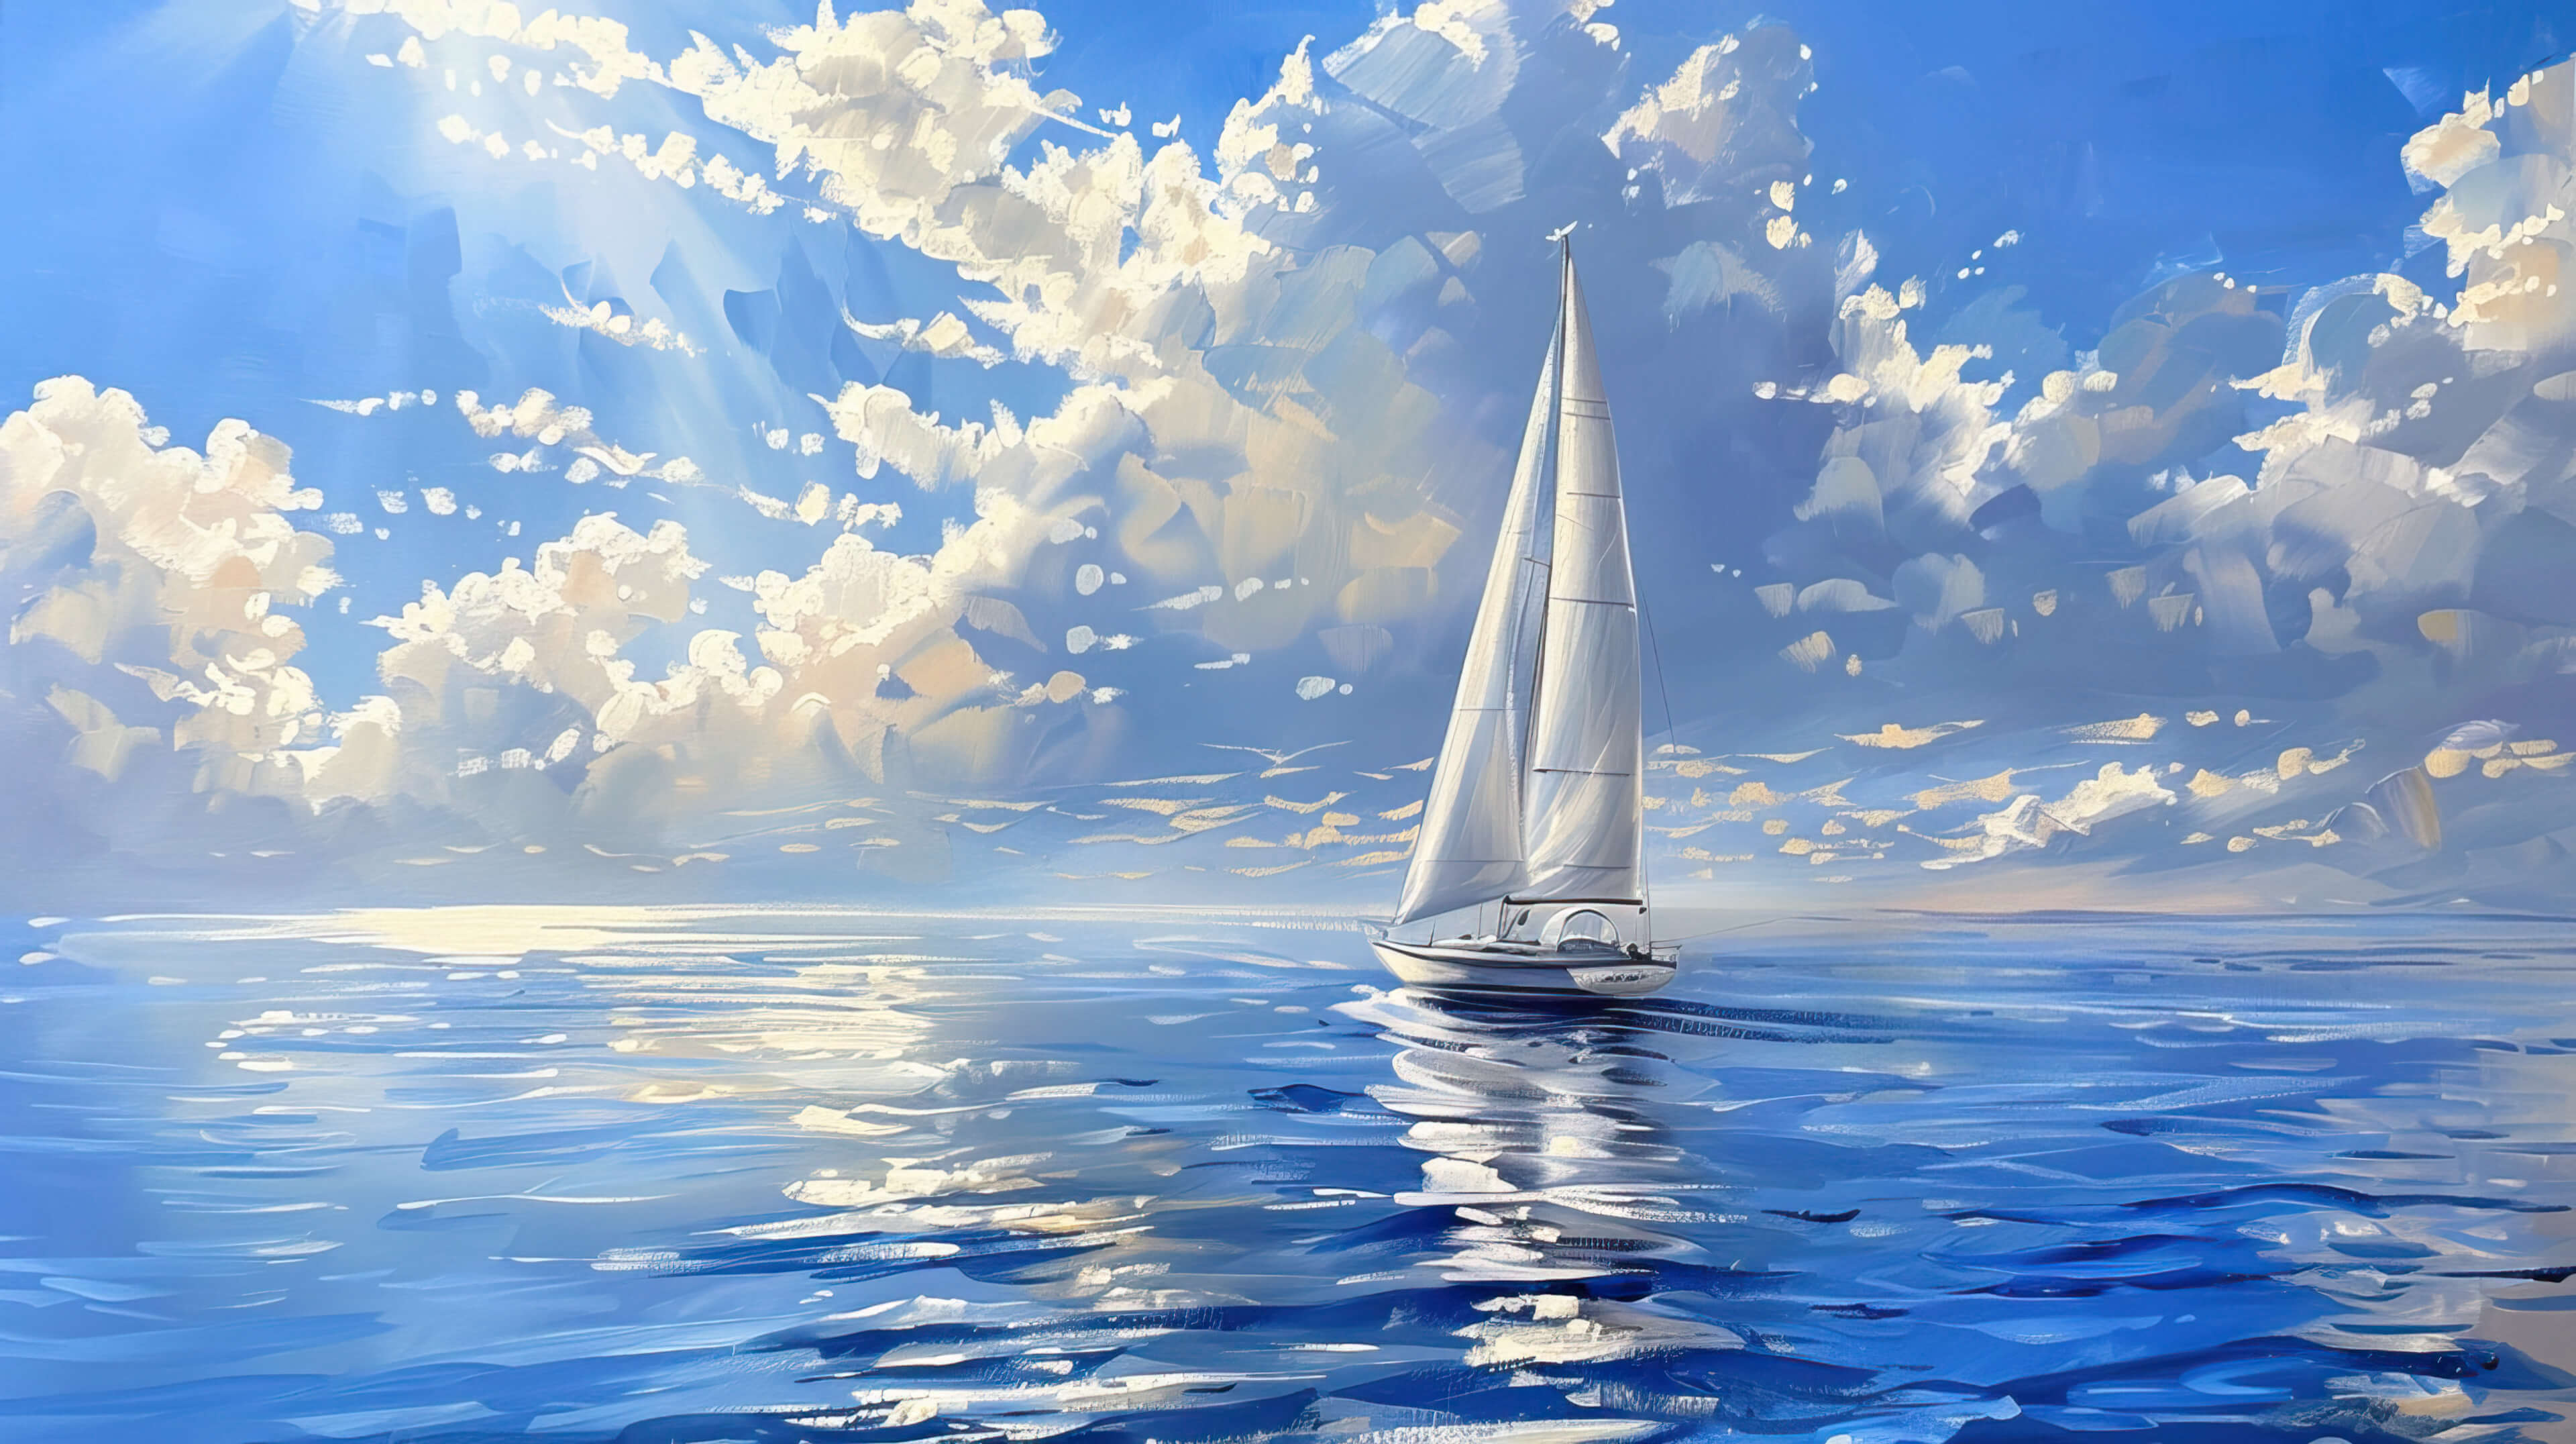 Enjoy a peaceful wallpaper featuring a sailboat smoothly gliding through serene waters with its white sails catching the gentle breeze under a clear blue sky adorned with fluffy clouds